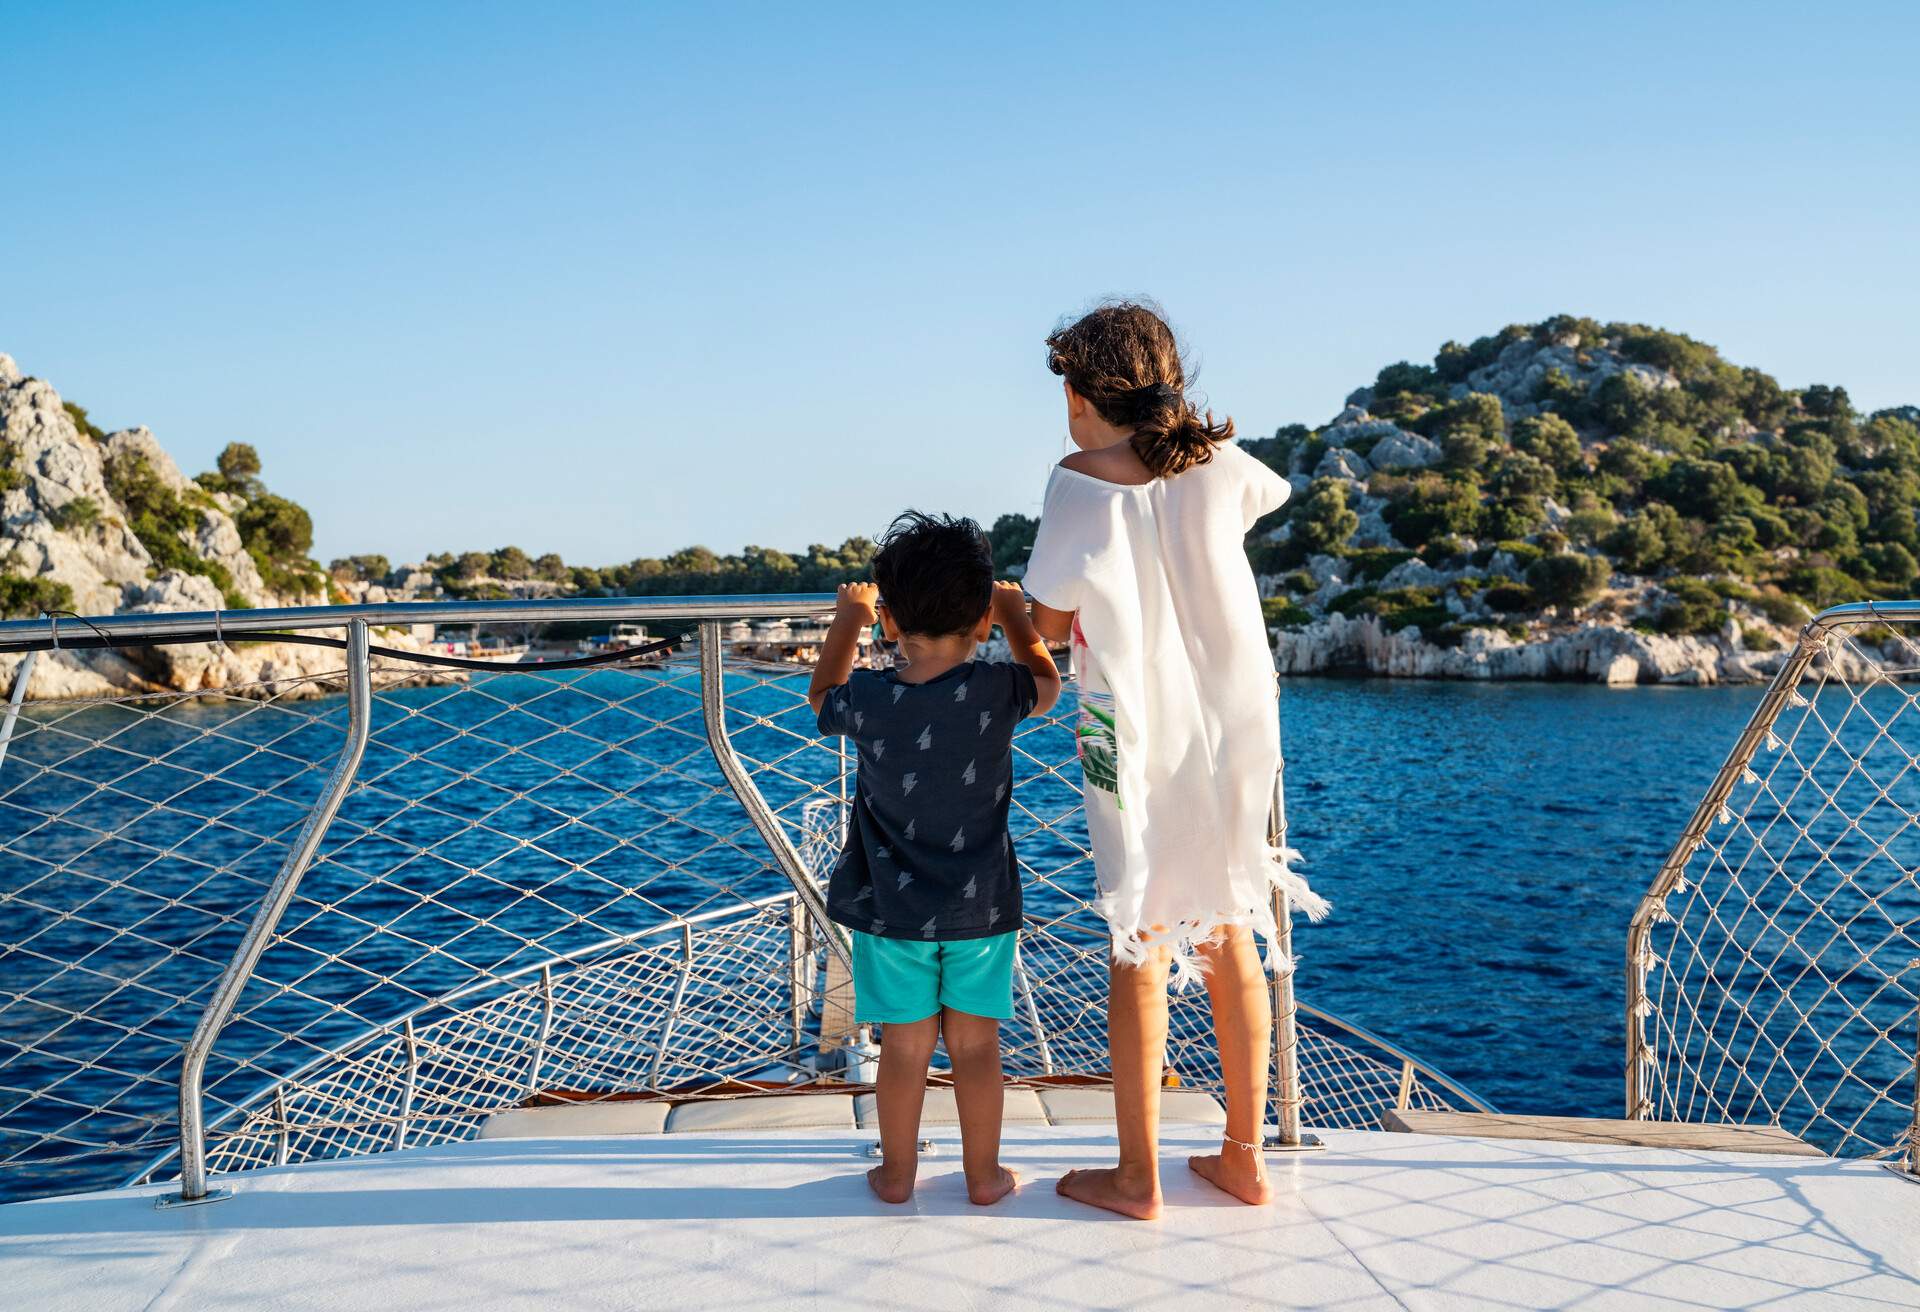 Cute little girl with her brother traveling on a sailboat at sunset in Kekova, Antalya, Turkey